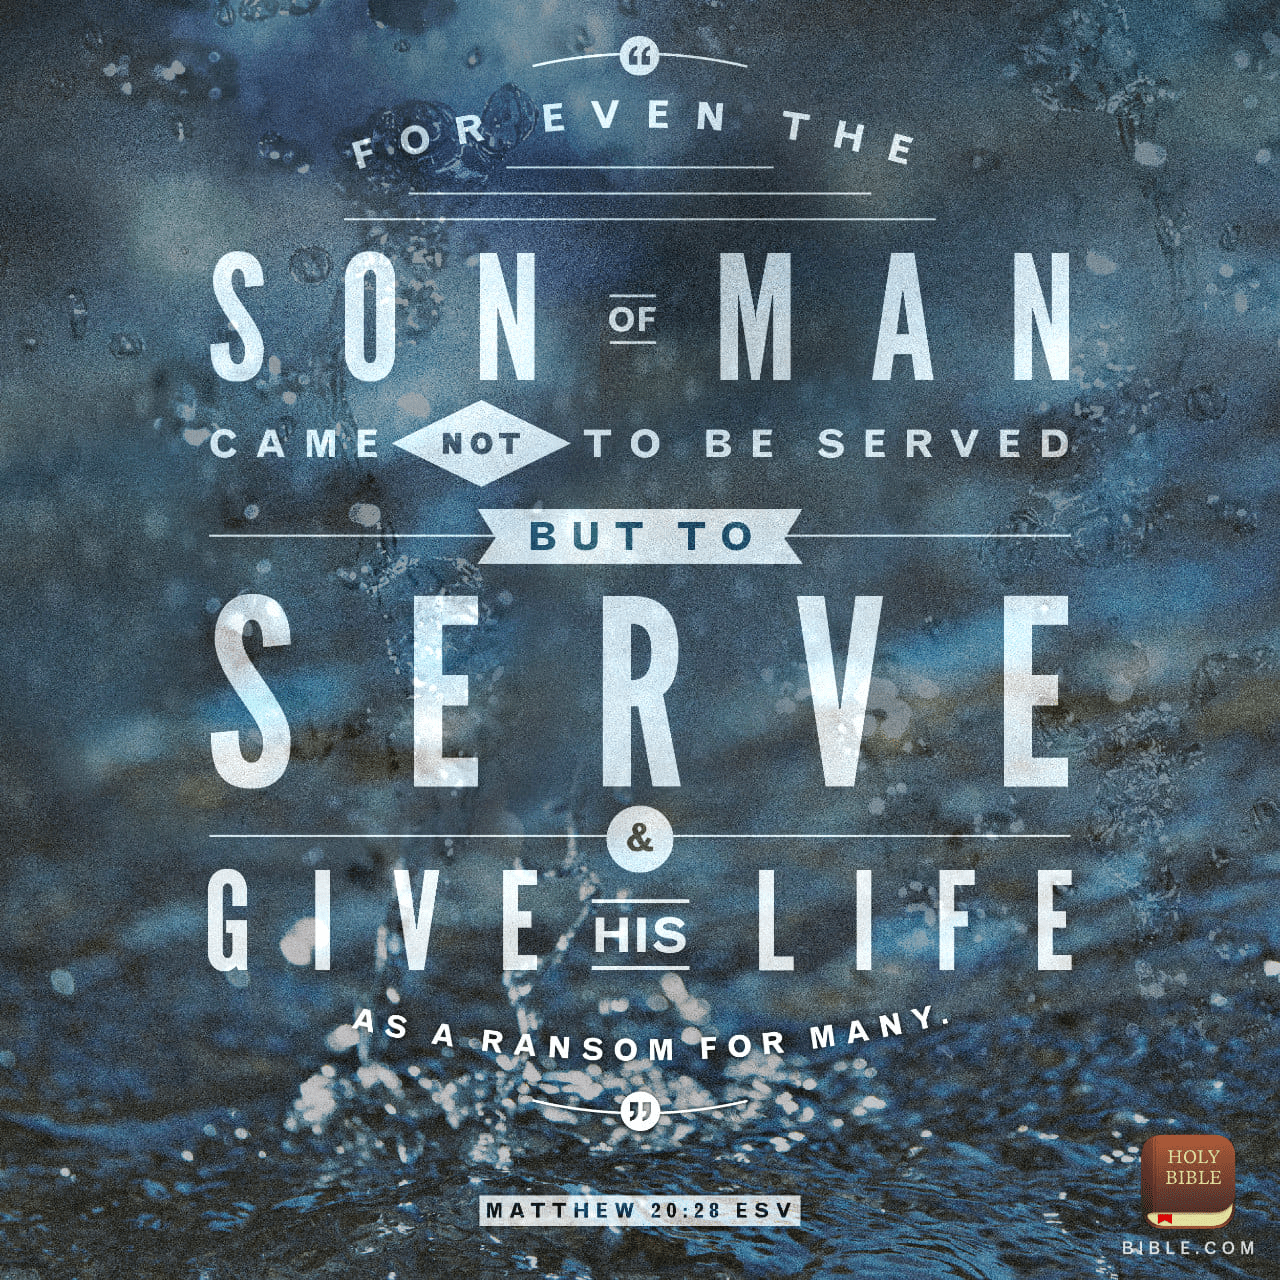 VOTD April 24 - “Just as the Son of Man did not come to be served, but to serve, and to give His life a ransom for many.” ‭‭Matthew‬ ‭20:28‬ ‭NASB‬‬